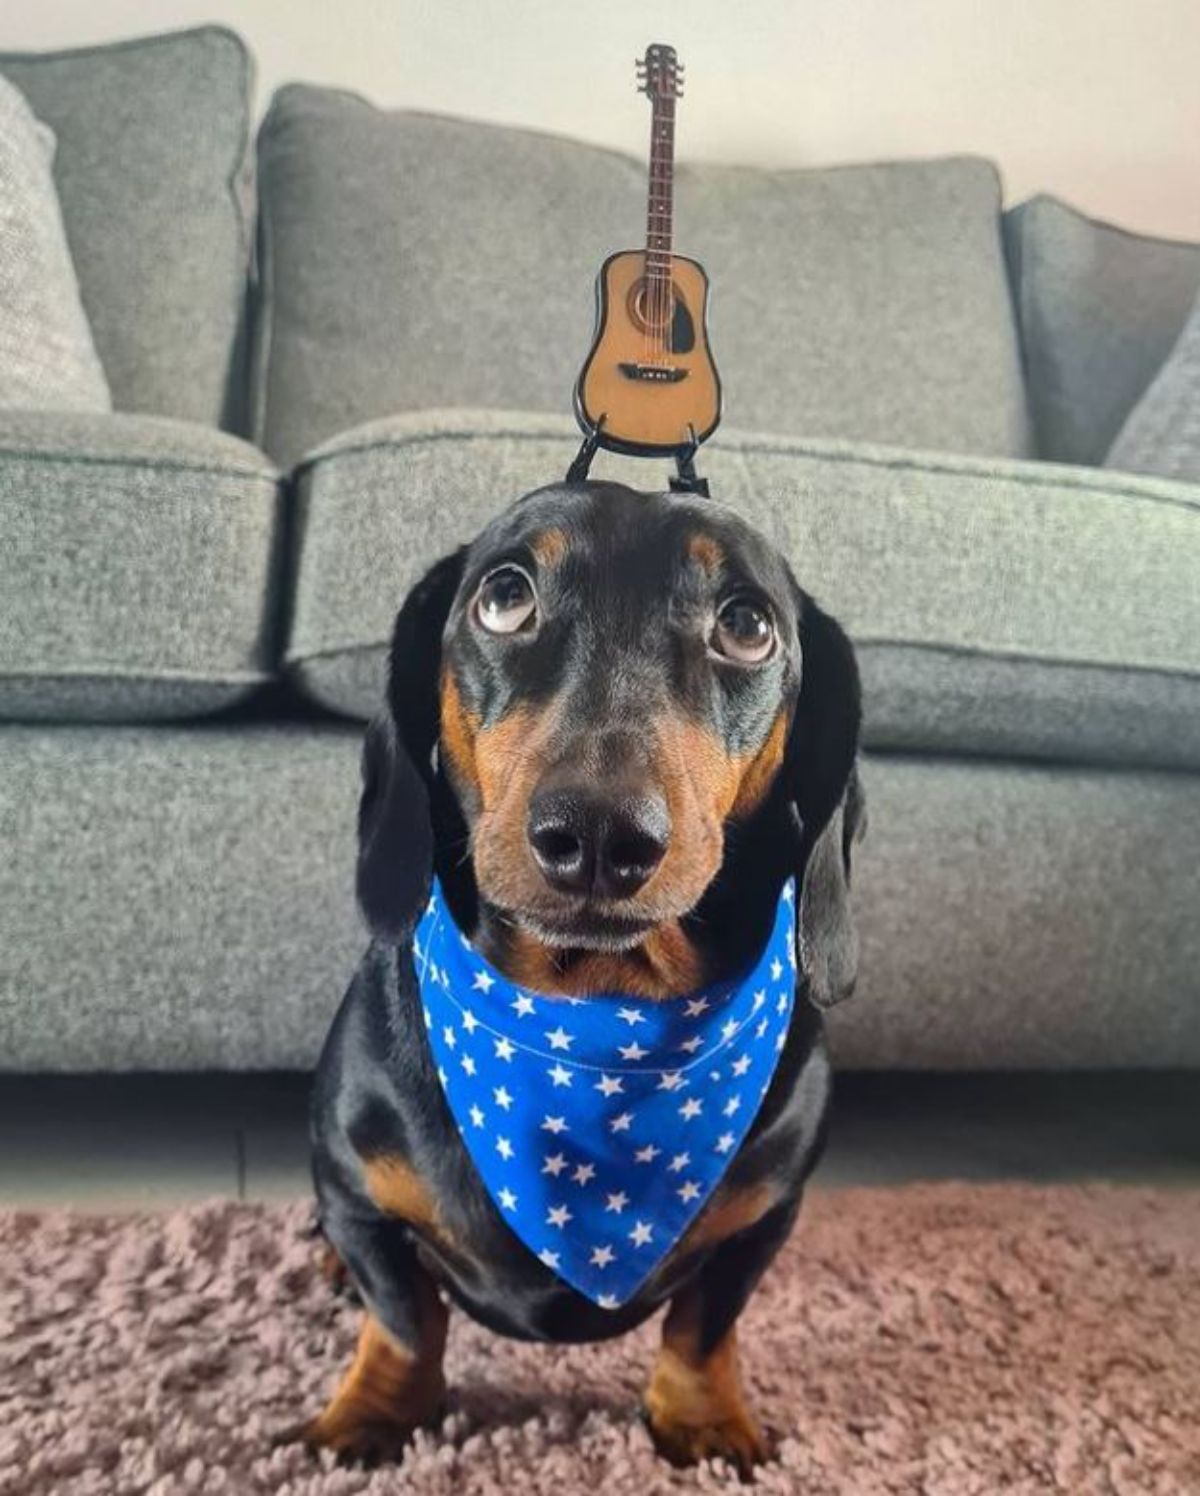 black and brown dachshund with a small brown and black guitar on the head and wearing a blue bandana with white stars